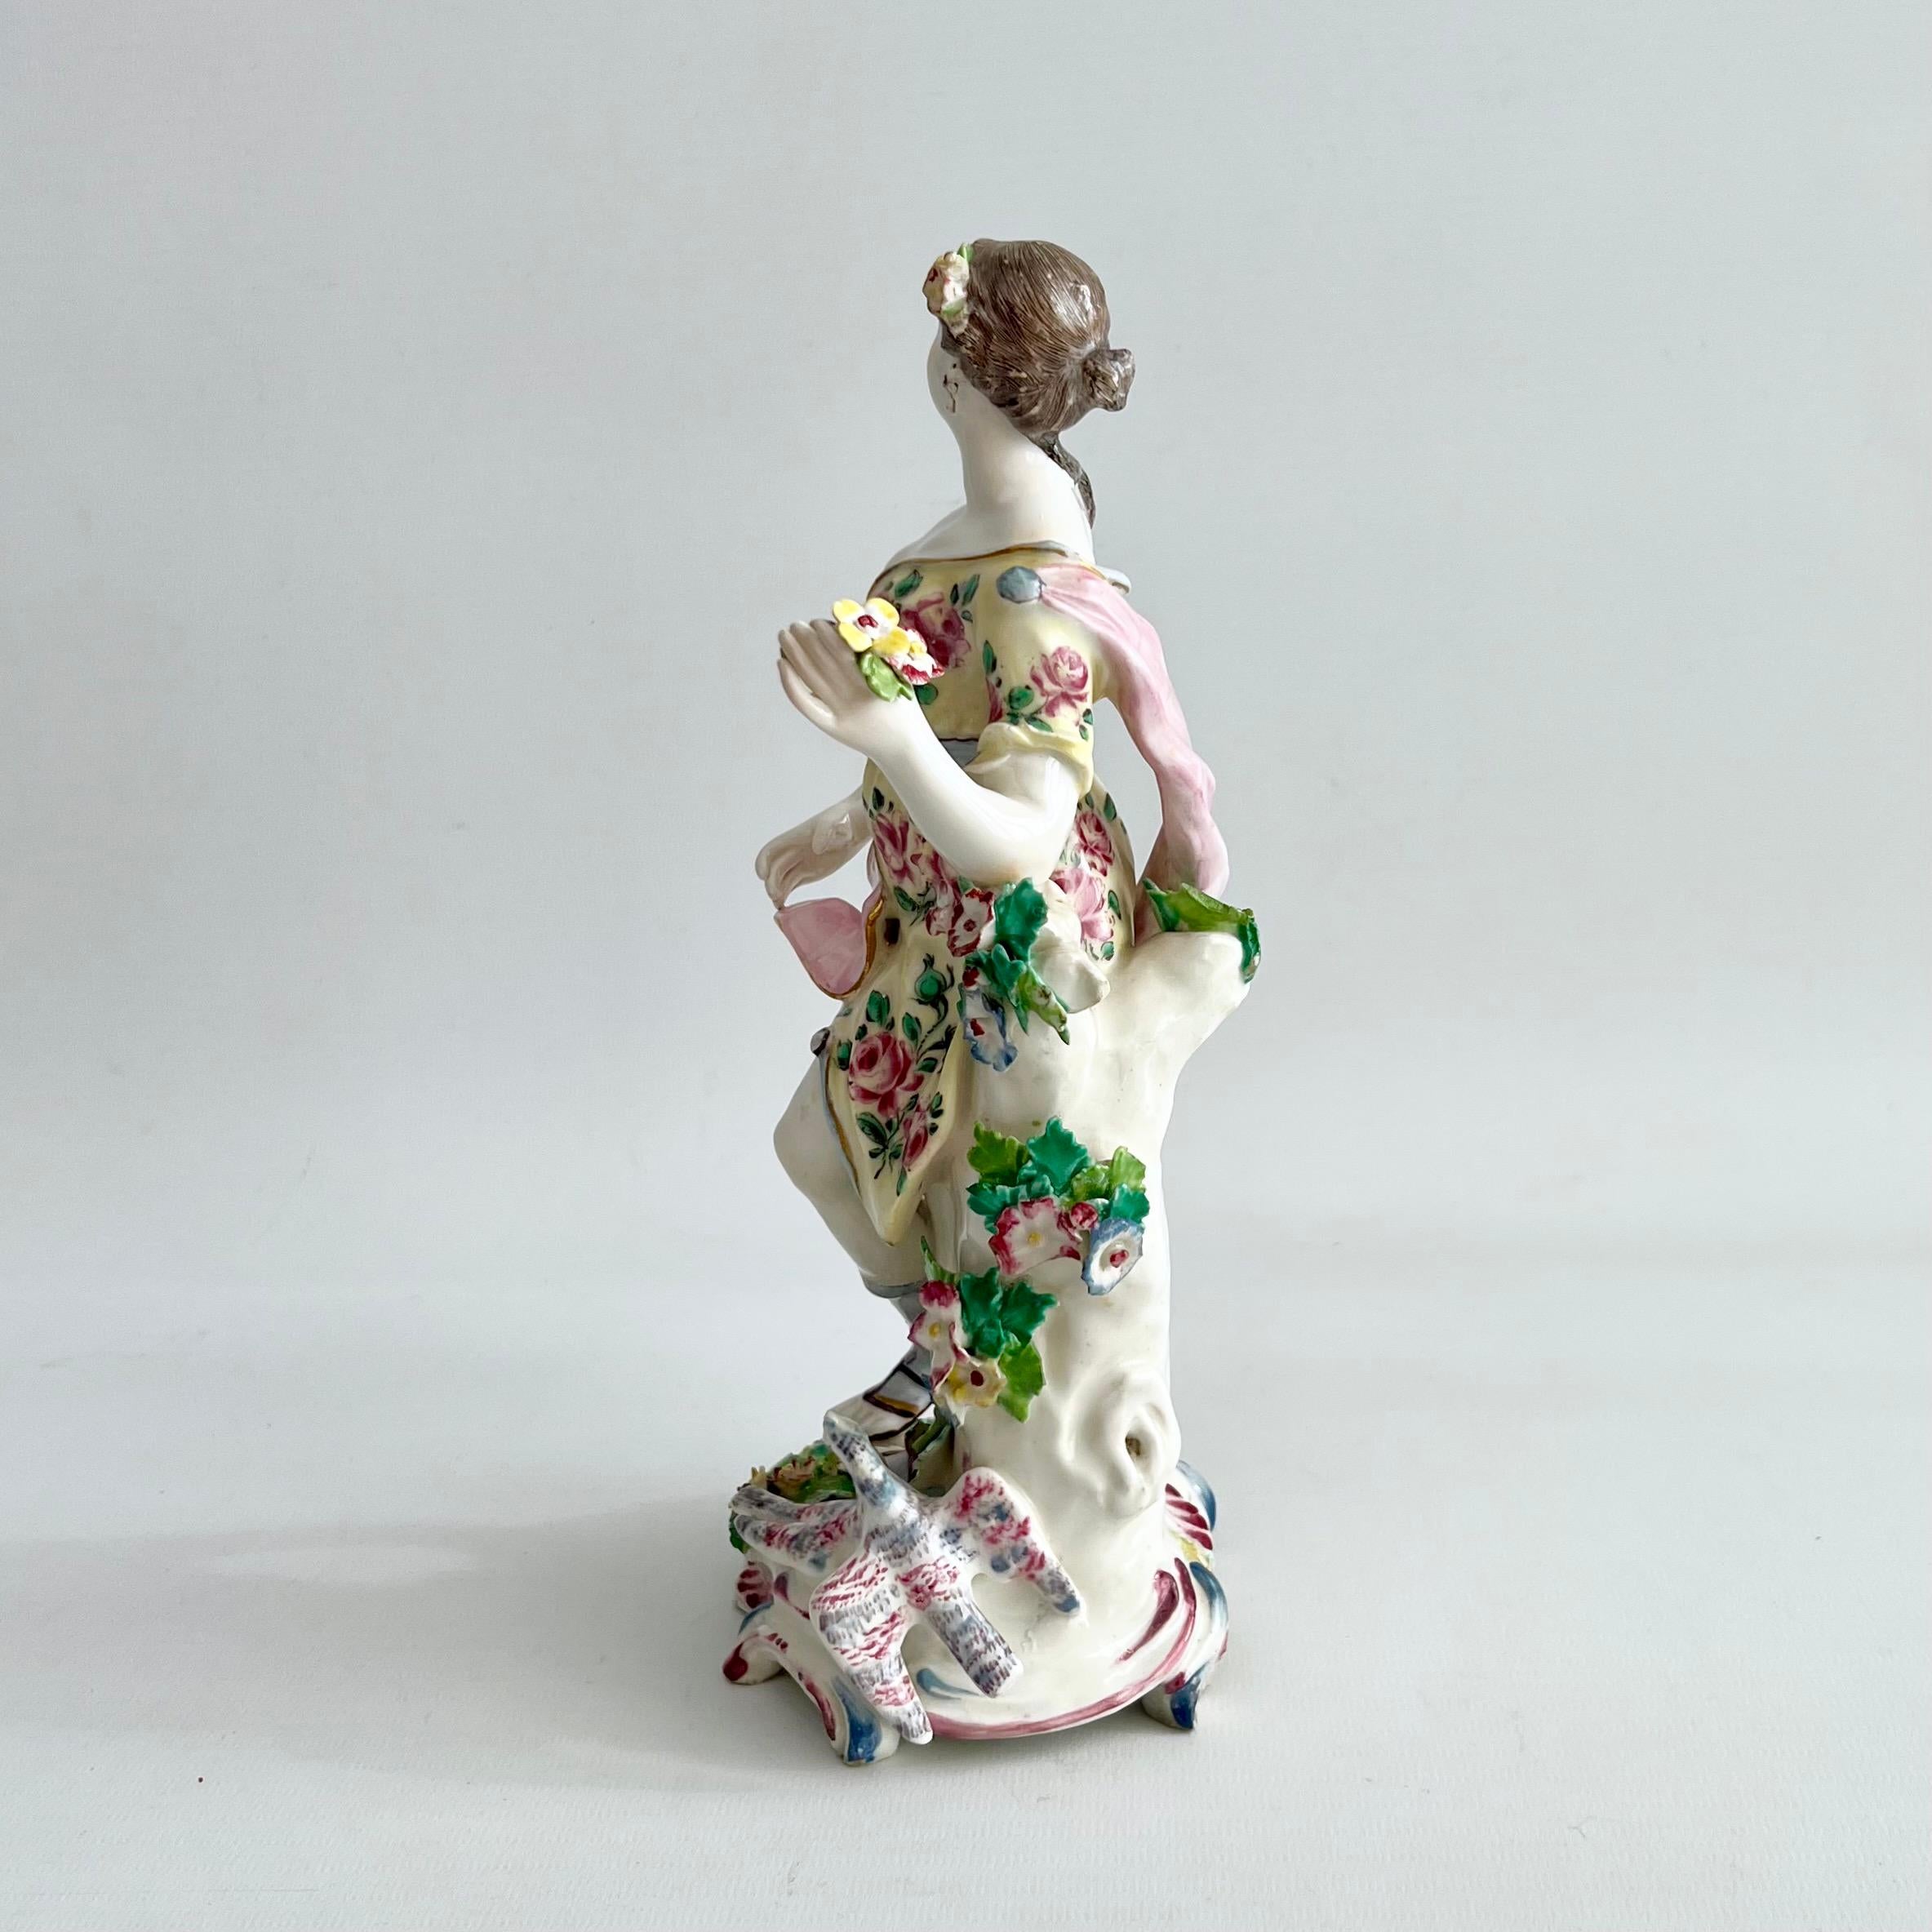 This is a rare and beautiful figure of Venus with two doves, made by the bow porcelain factory between 1756 and 1764. We see Venus standing holding her robe with one hand, a flower posy in the other hand. One of her breasts is delicately exposed. At